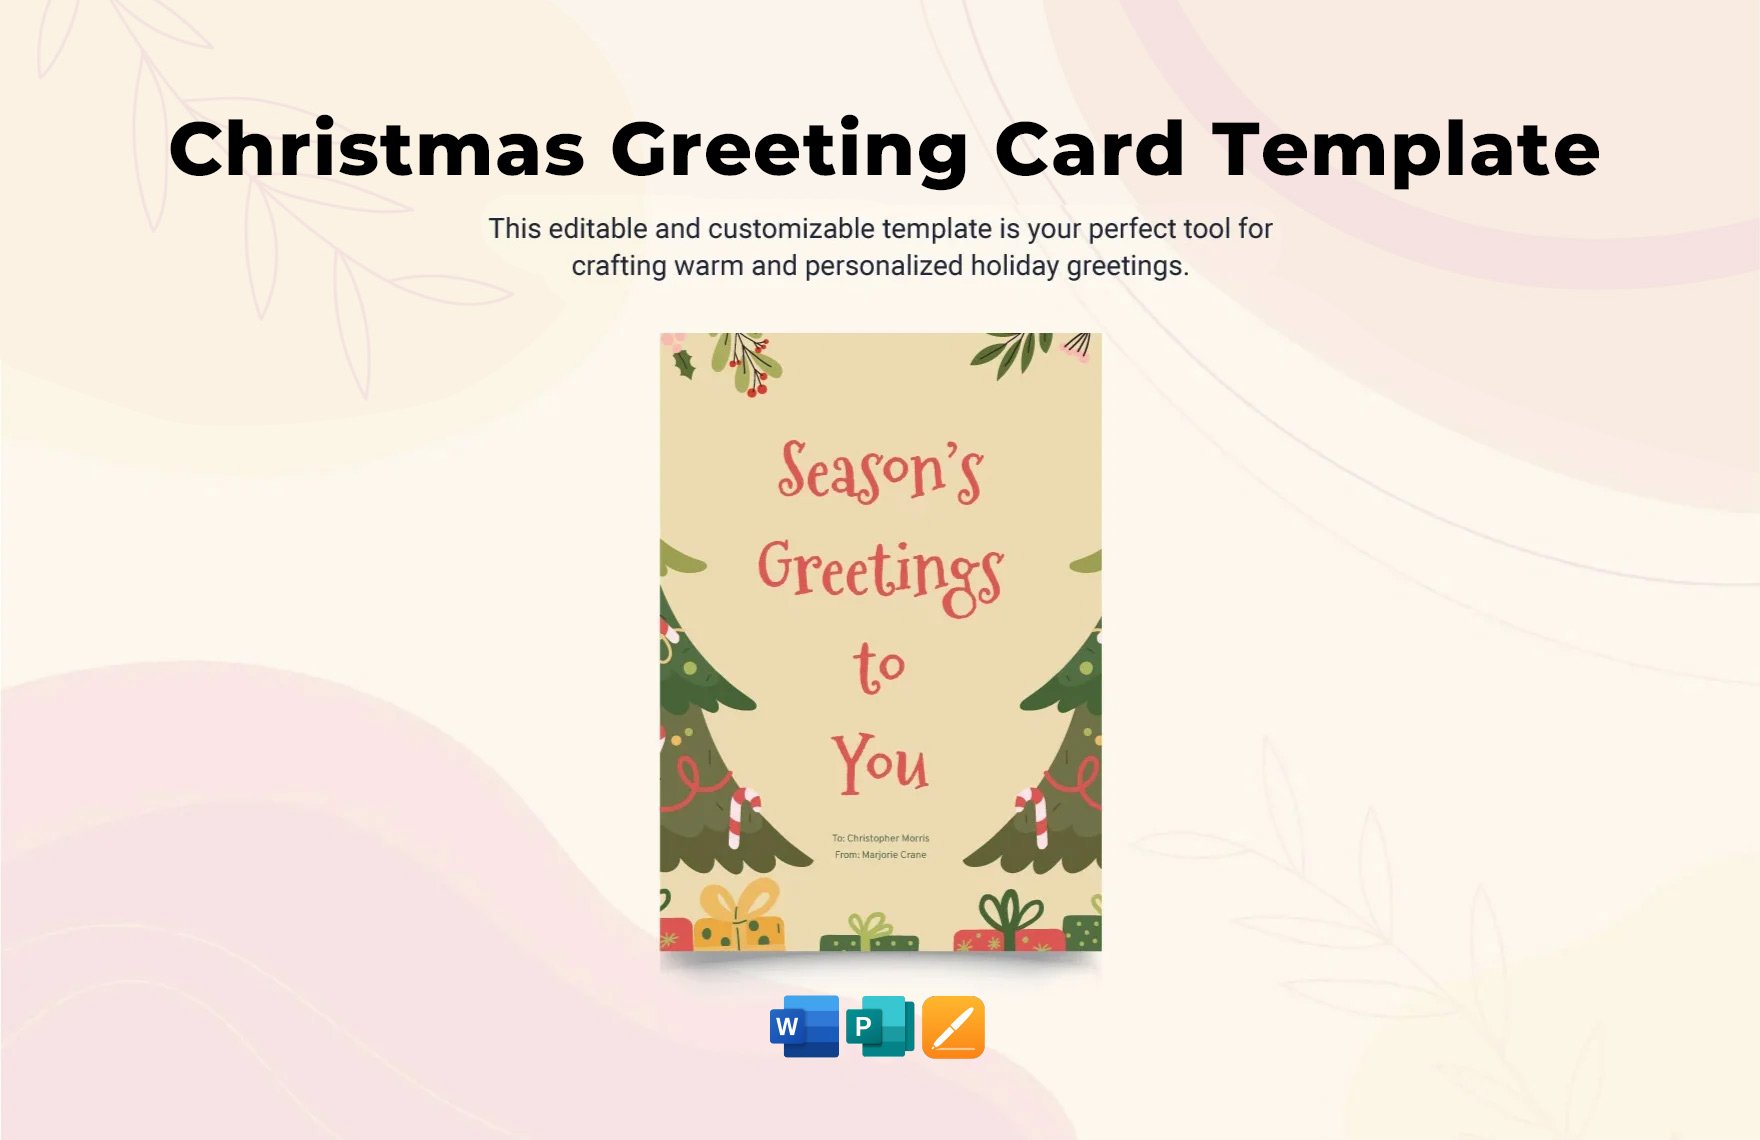 Free Christmas Greeting Card Template in Word, Apple Pages, Publisher